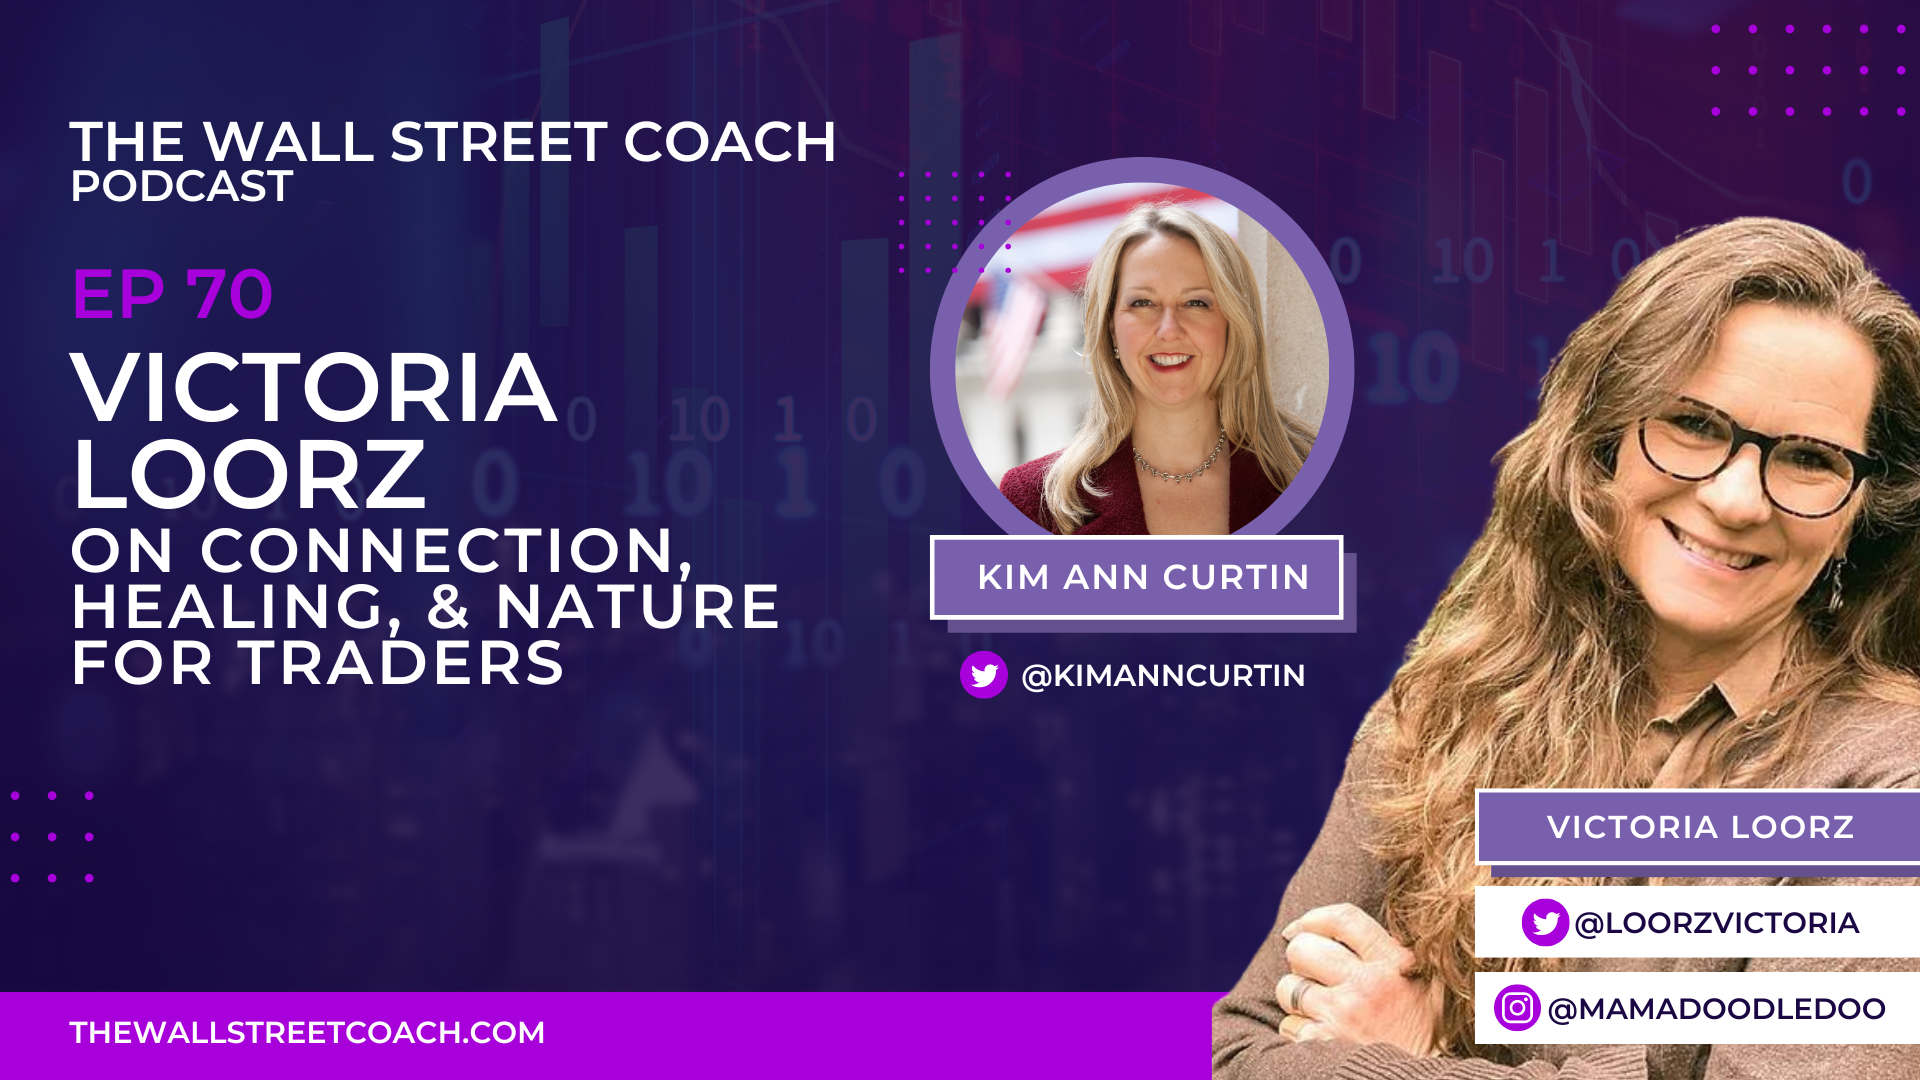 Ep 70: Victoria Loorz on Connection, Healing, & Nature For Traders